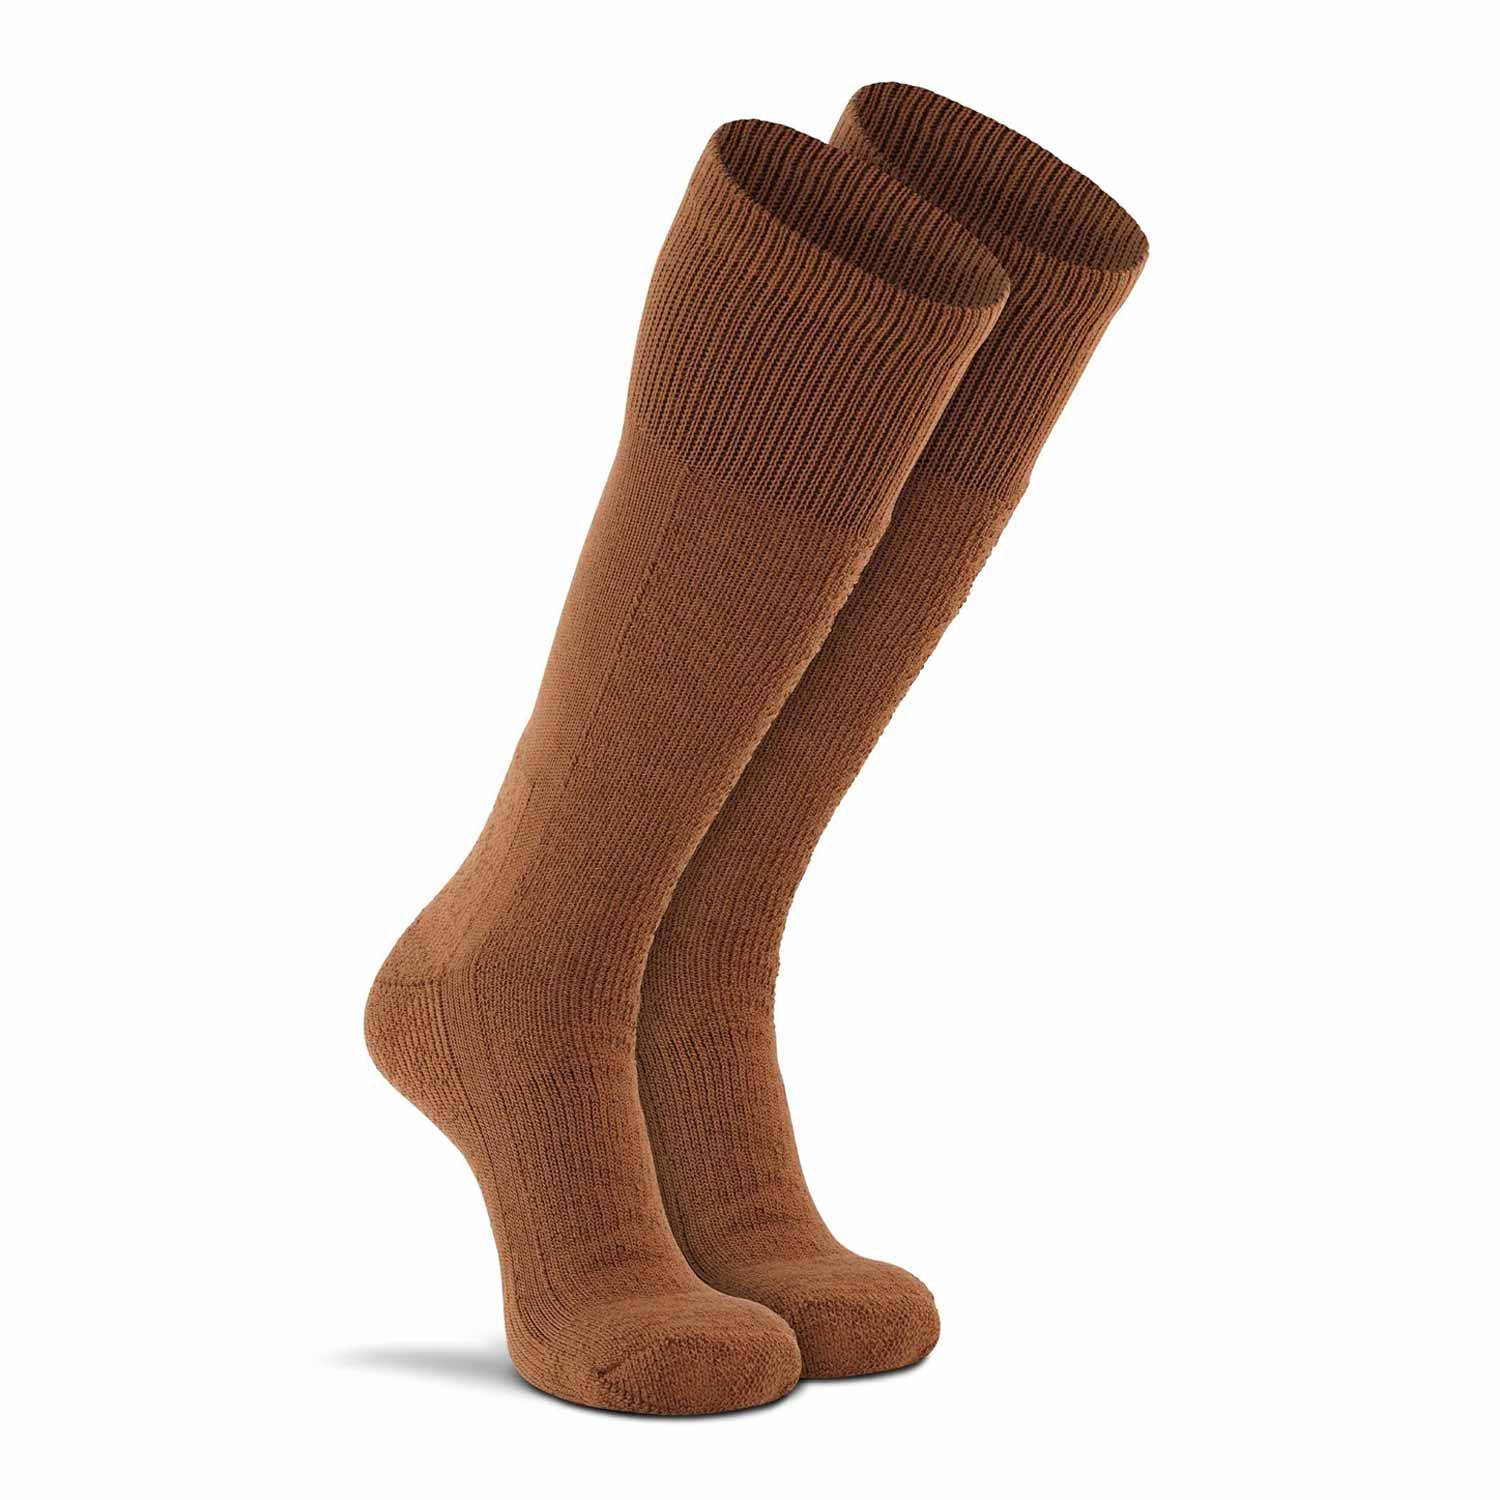 FOX RIVER COLD WEATHER BOOT SOCKS